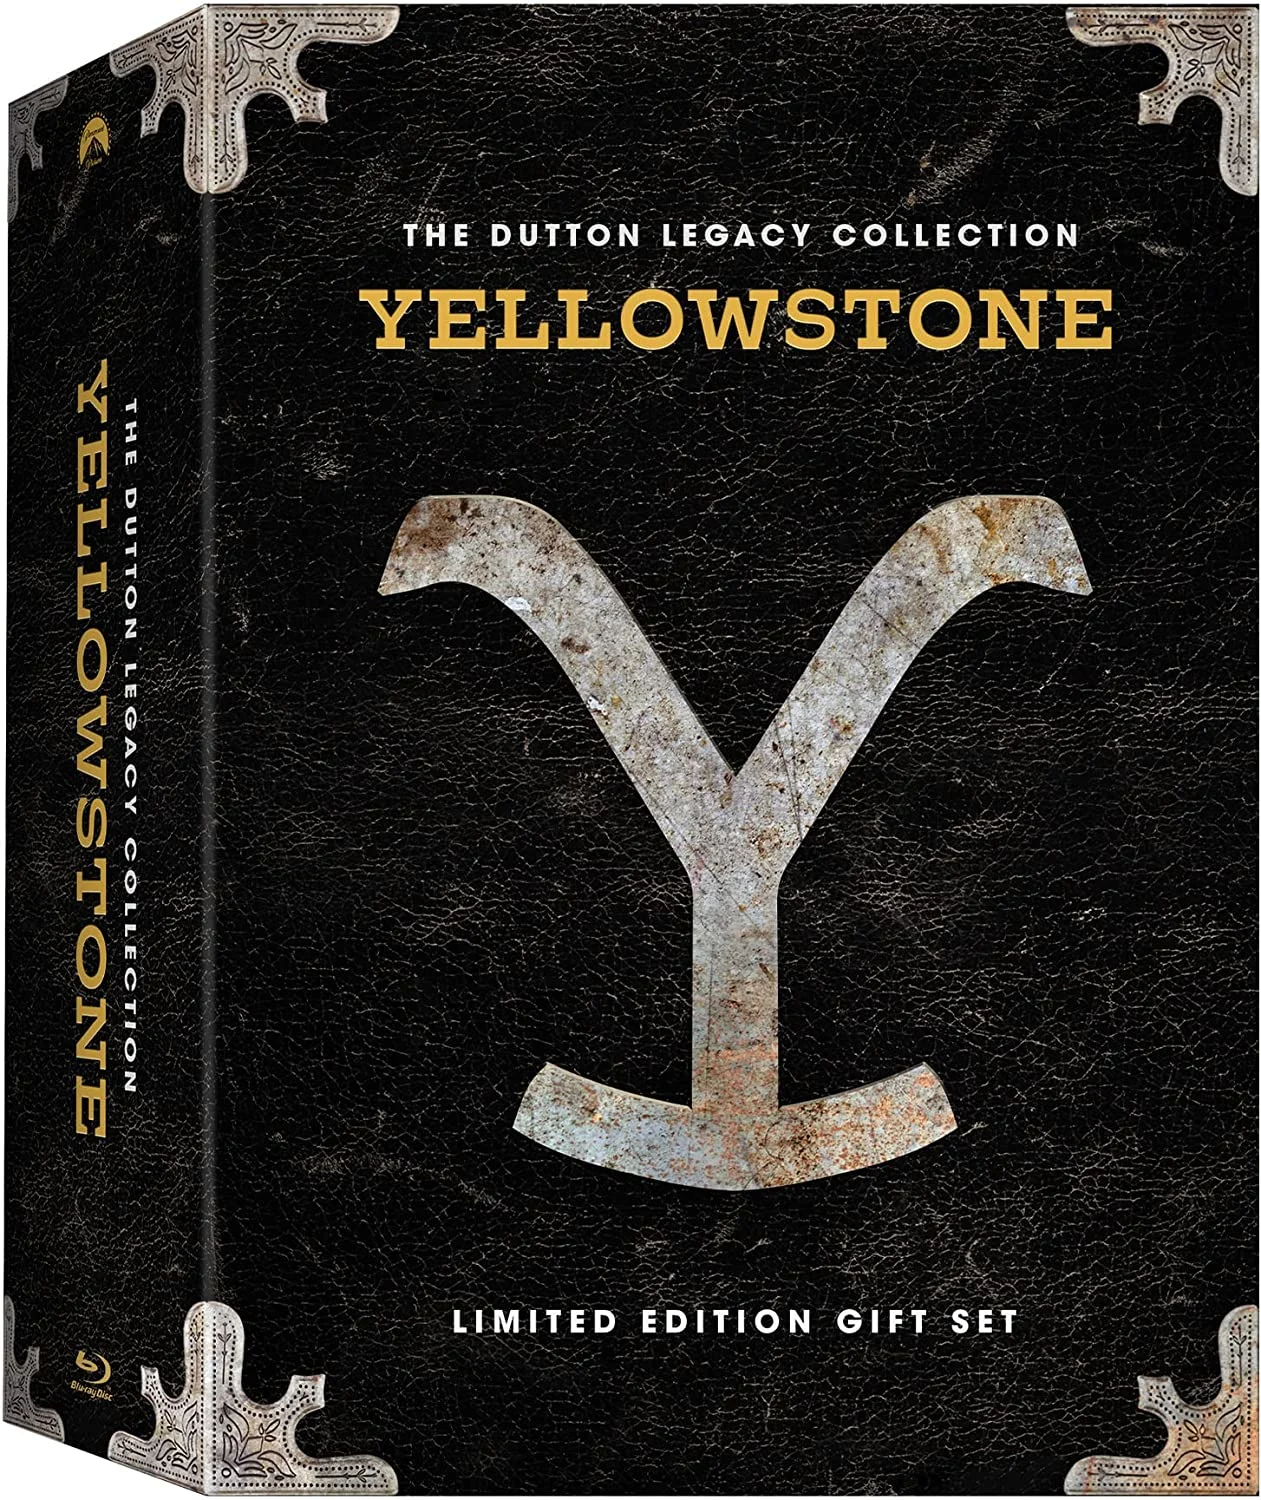 Yellowstone: The Dutton Legacy Collection (Blu-ray) on MovieShack